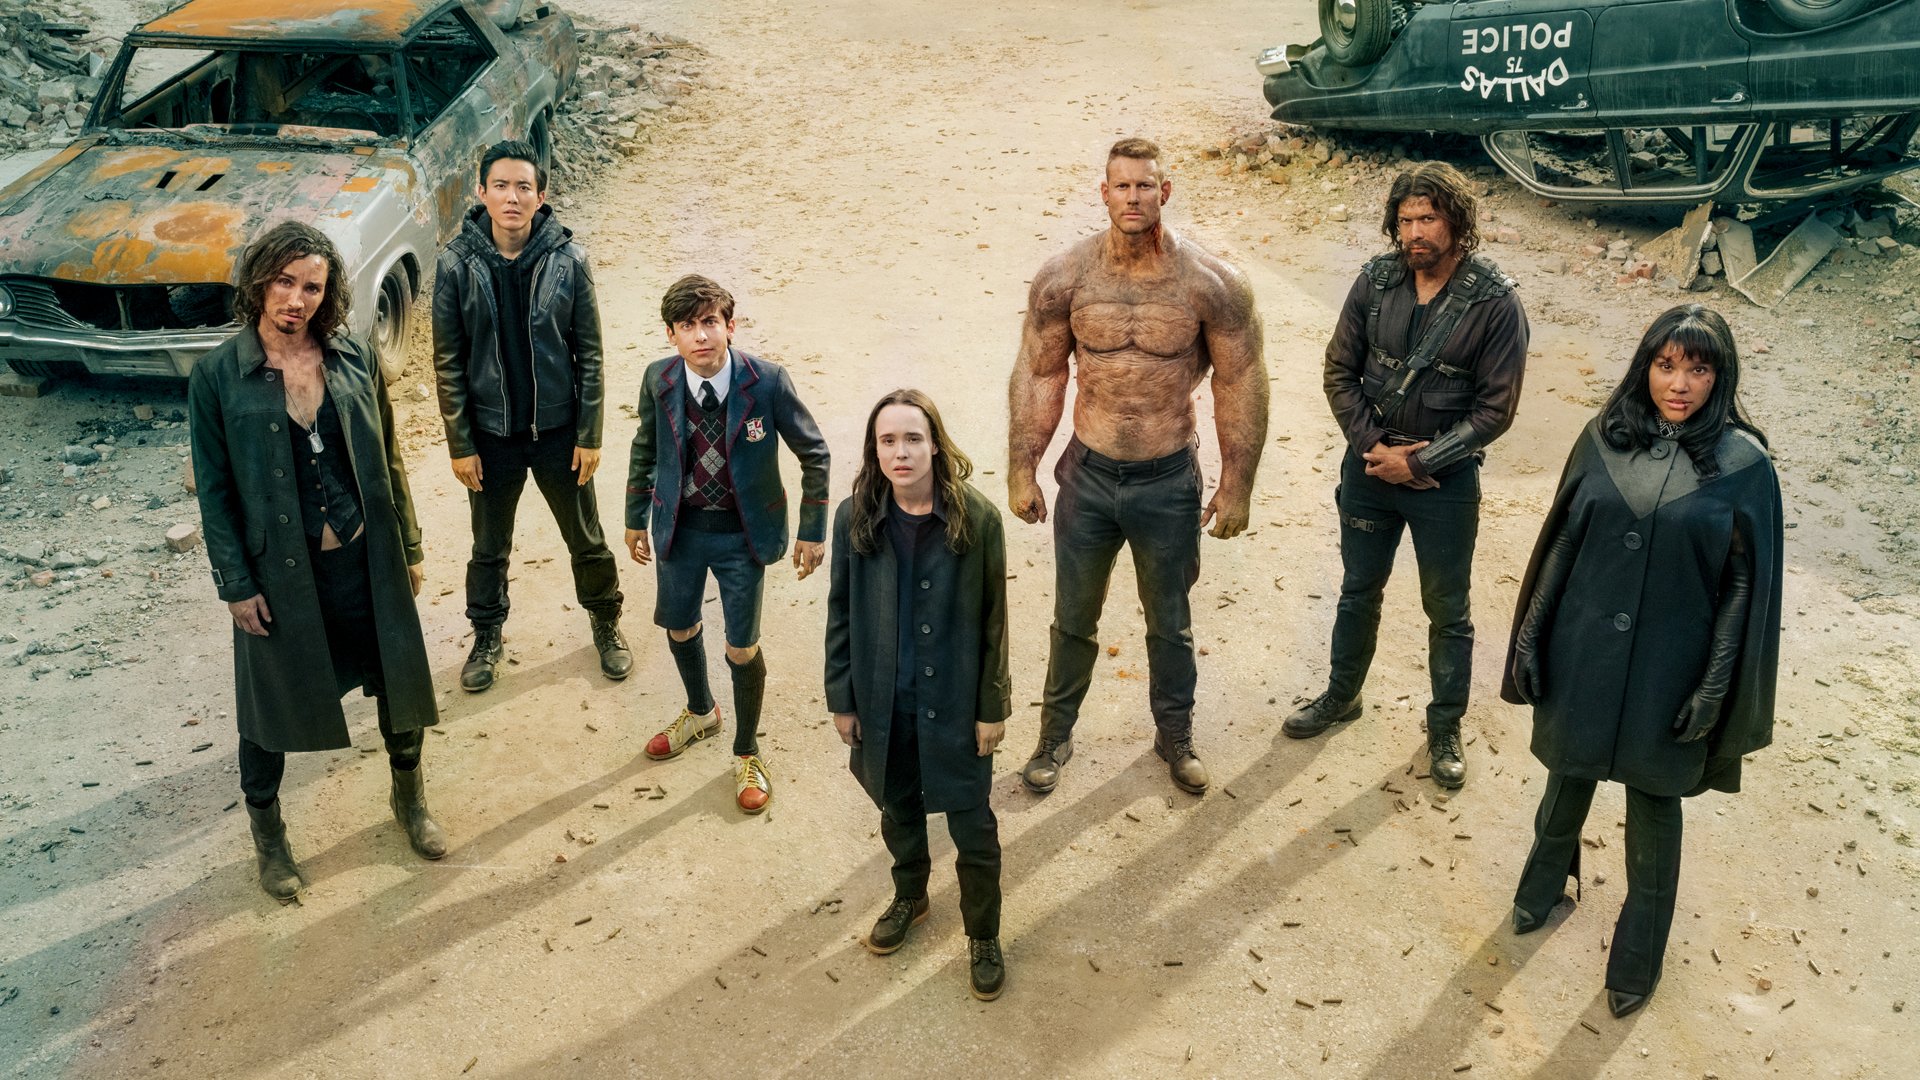 Robert Sheehan as Klaus, Justin H. Min as Ben, Aidan Gallagher as Number Five, Elliot Page as Vanya, Tom Hopper as Luther, David Castañeda as Diego, Emmy Raver-Lampman as Allison of 'The Umbrella Academy' Season 2 cast